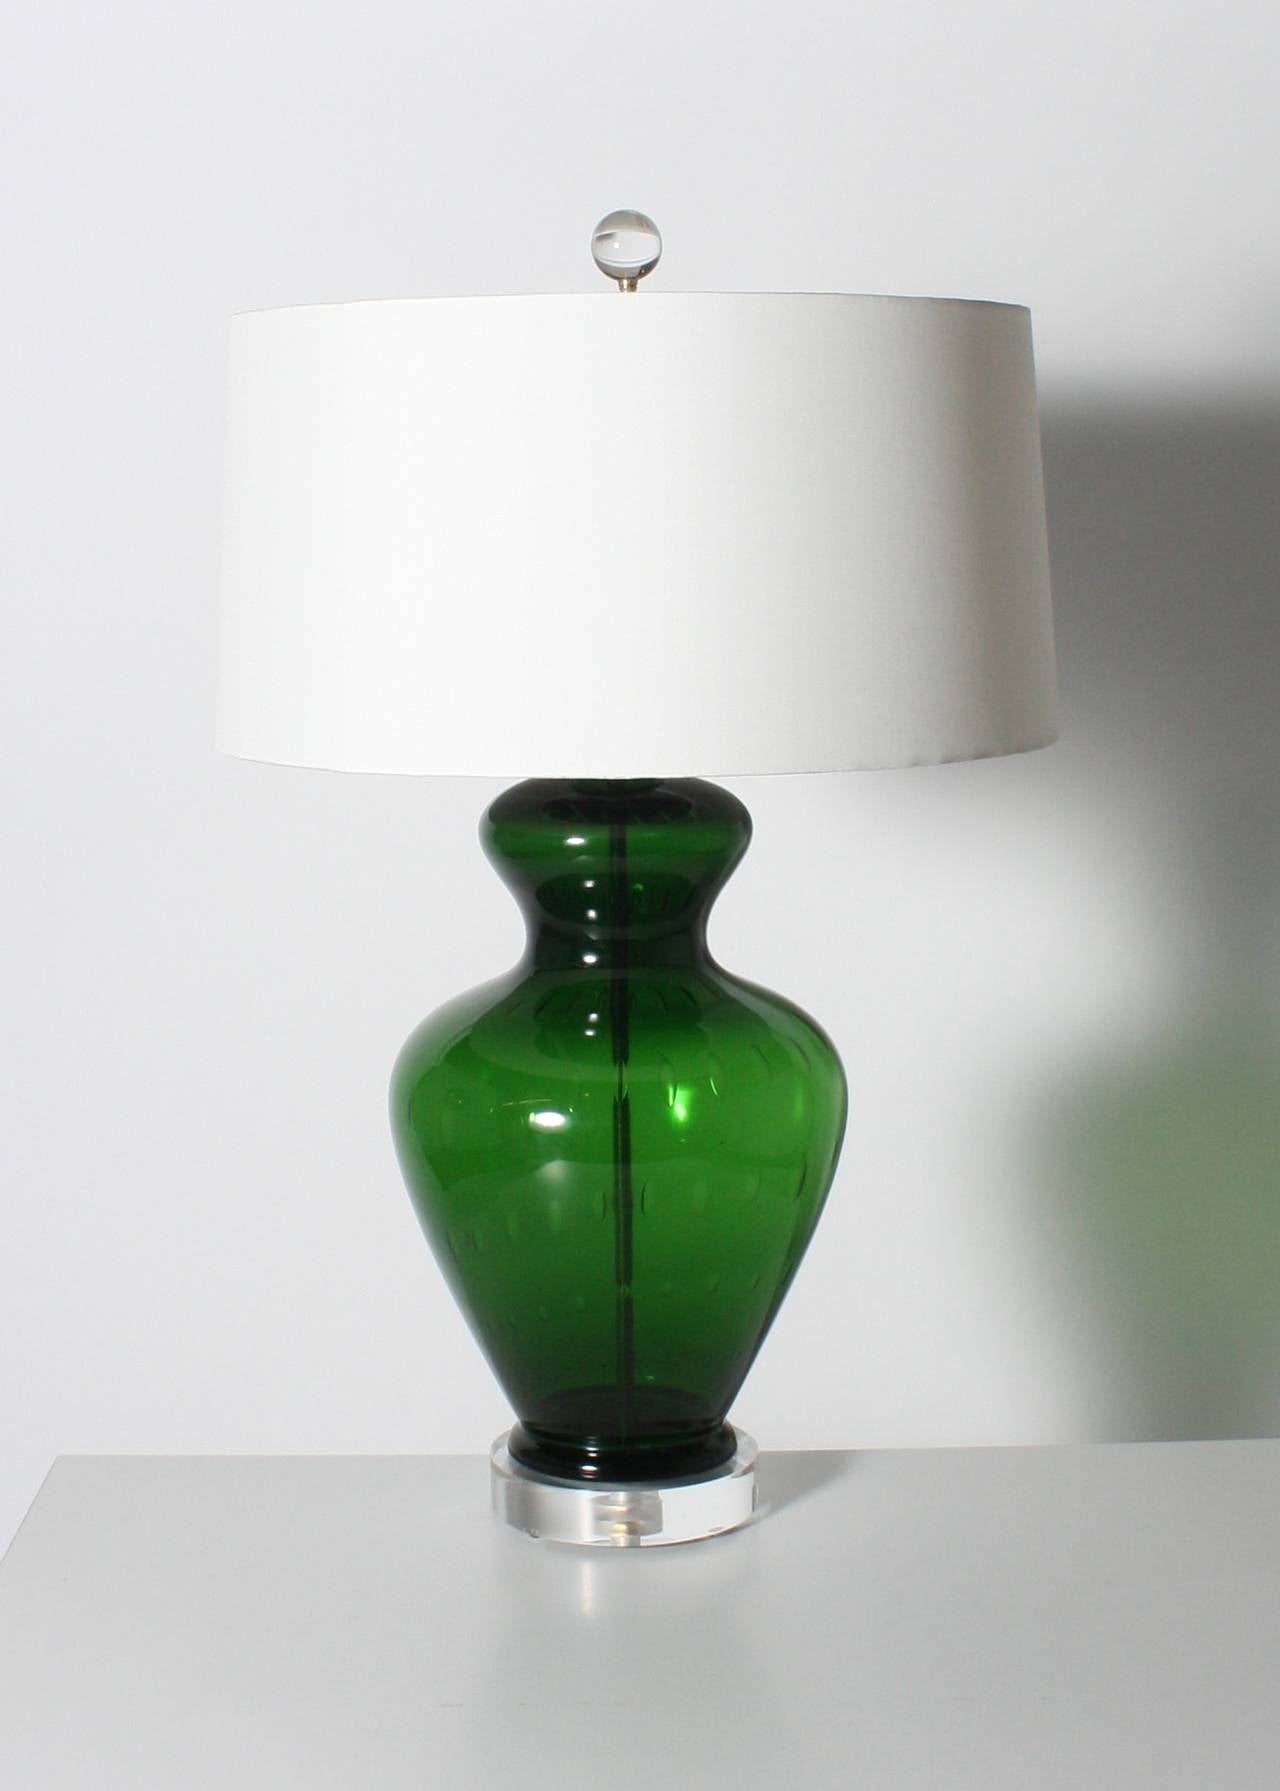 Pair of green Barovier lamps with large bullicante inclusions. Linen shades rolled with no bias. Three-way socket, 50/100/150 watt. Brass hardware. Lucite base. Crystal ball finial. Gold twisted cording.